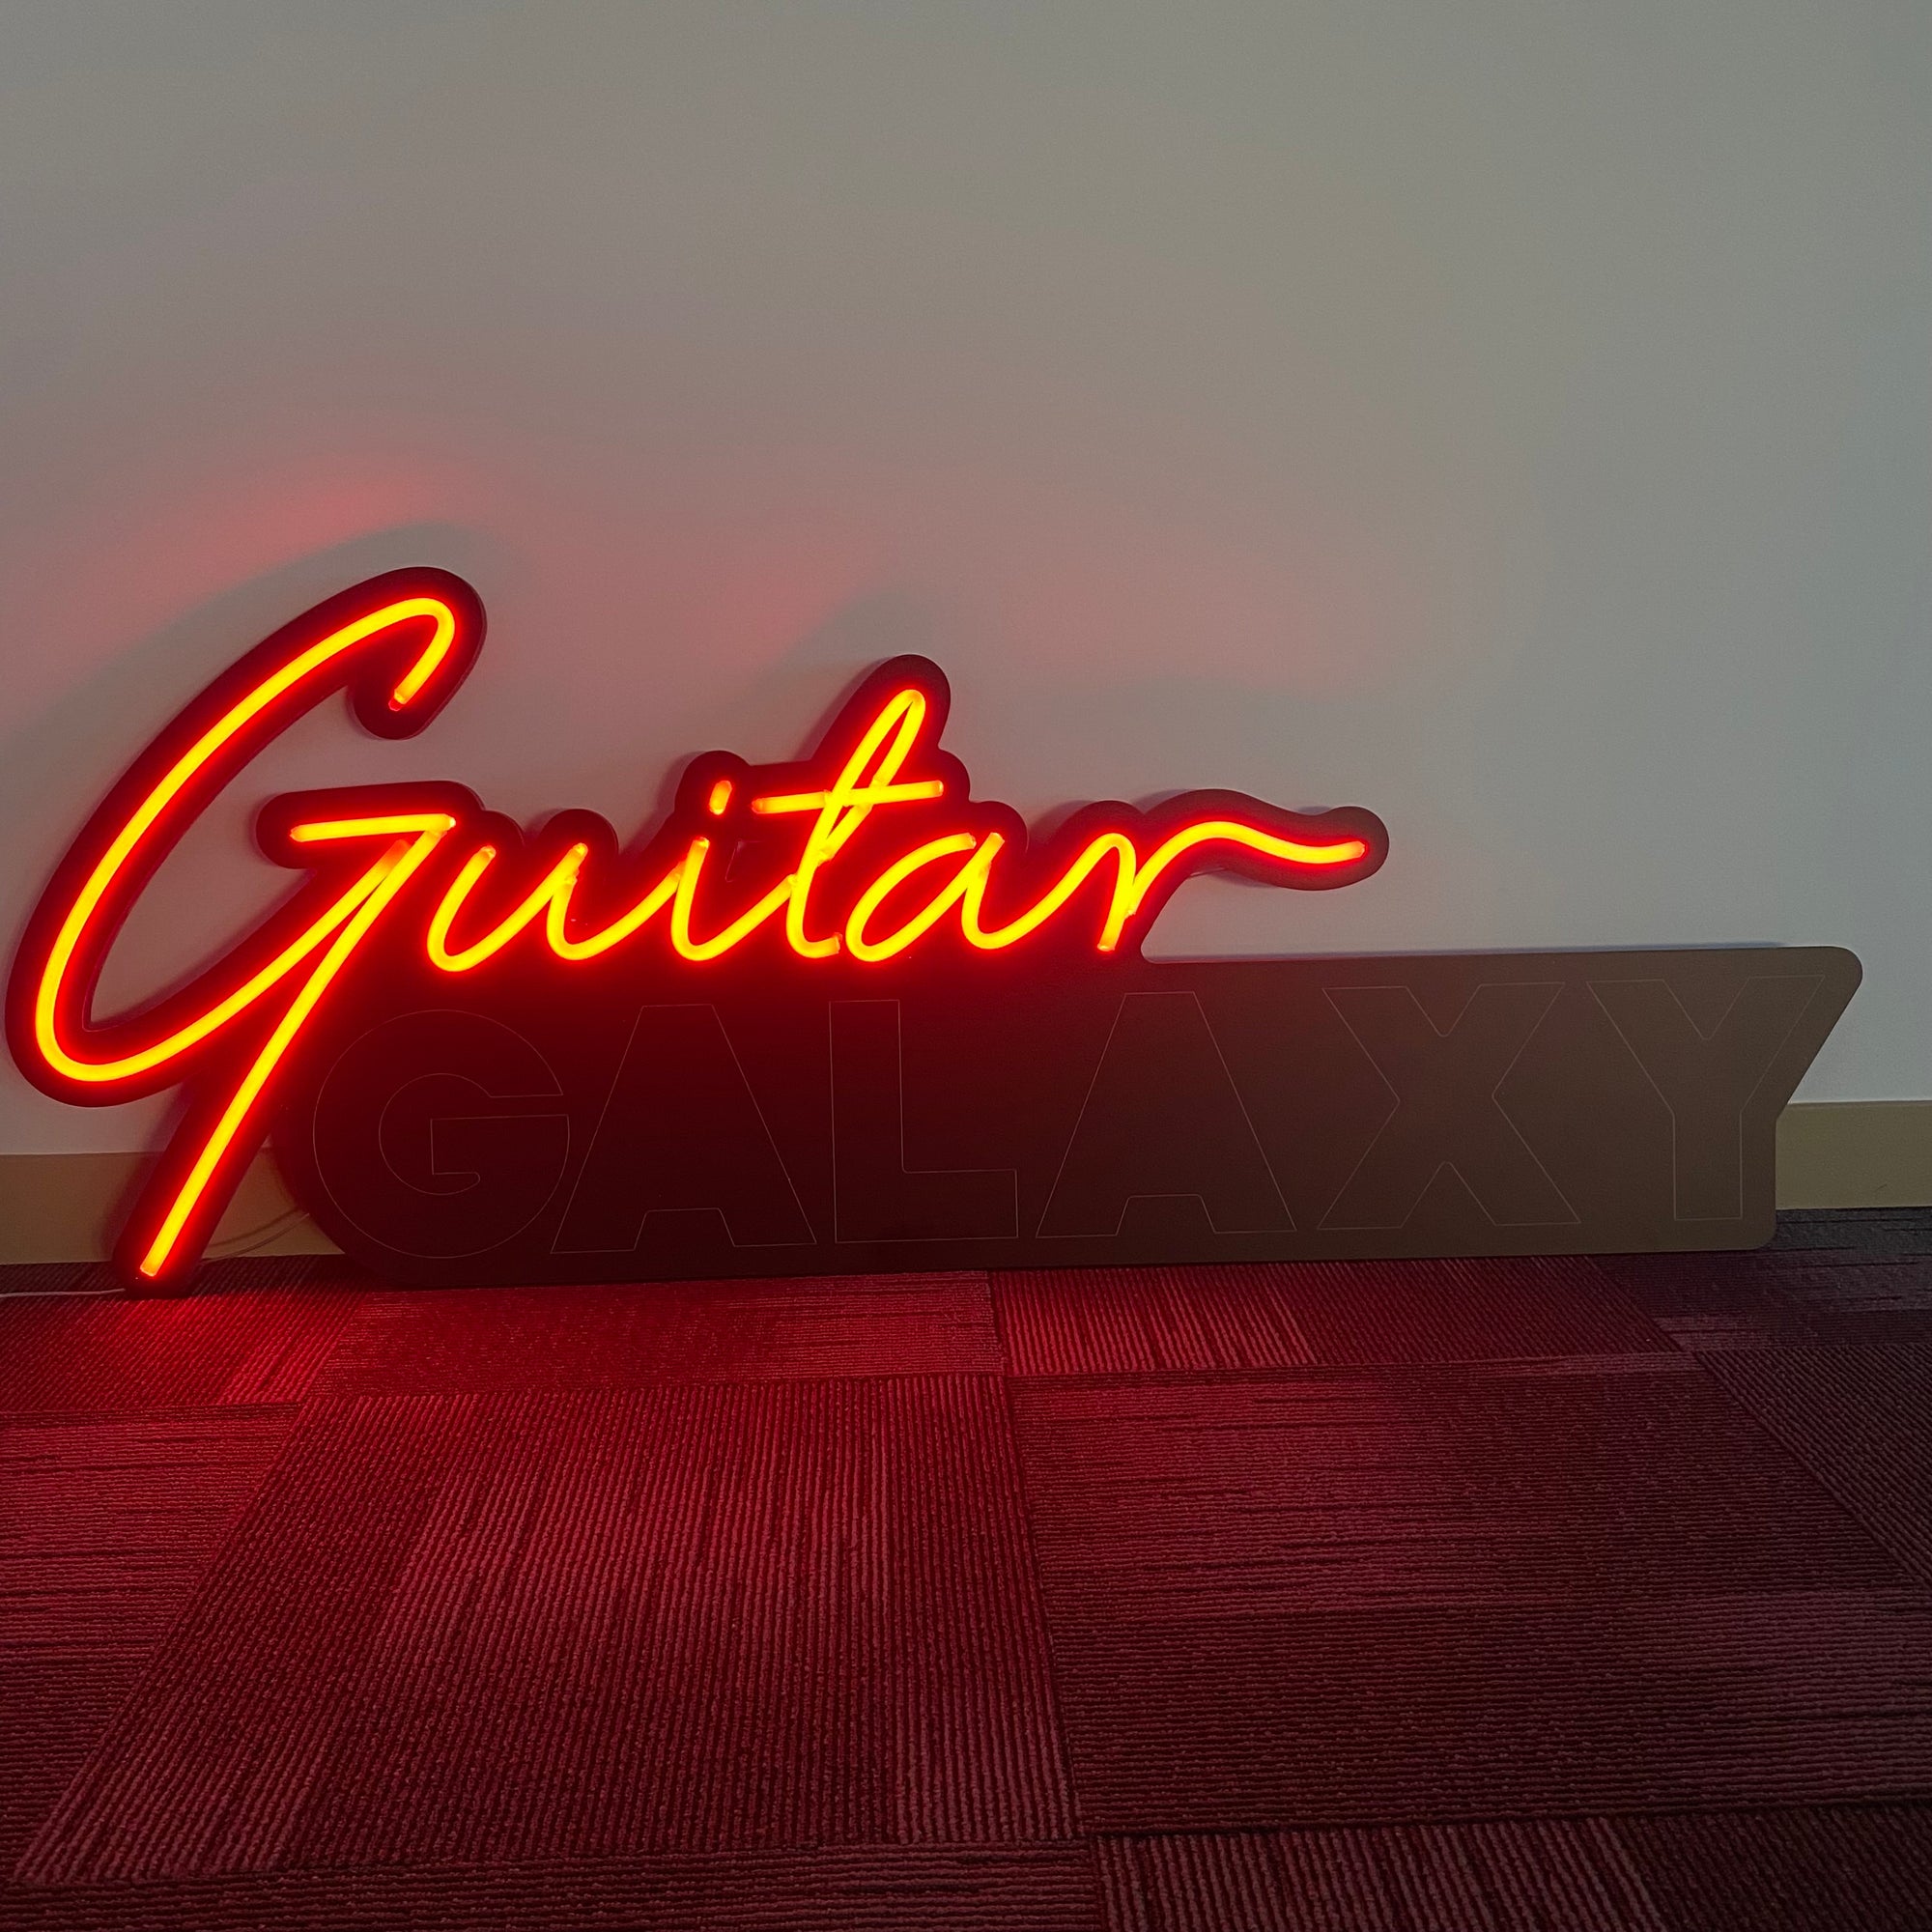 Guitar Galaxy Neon Sign @ TV Show Production